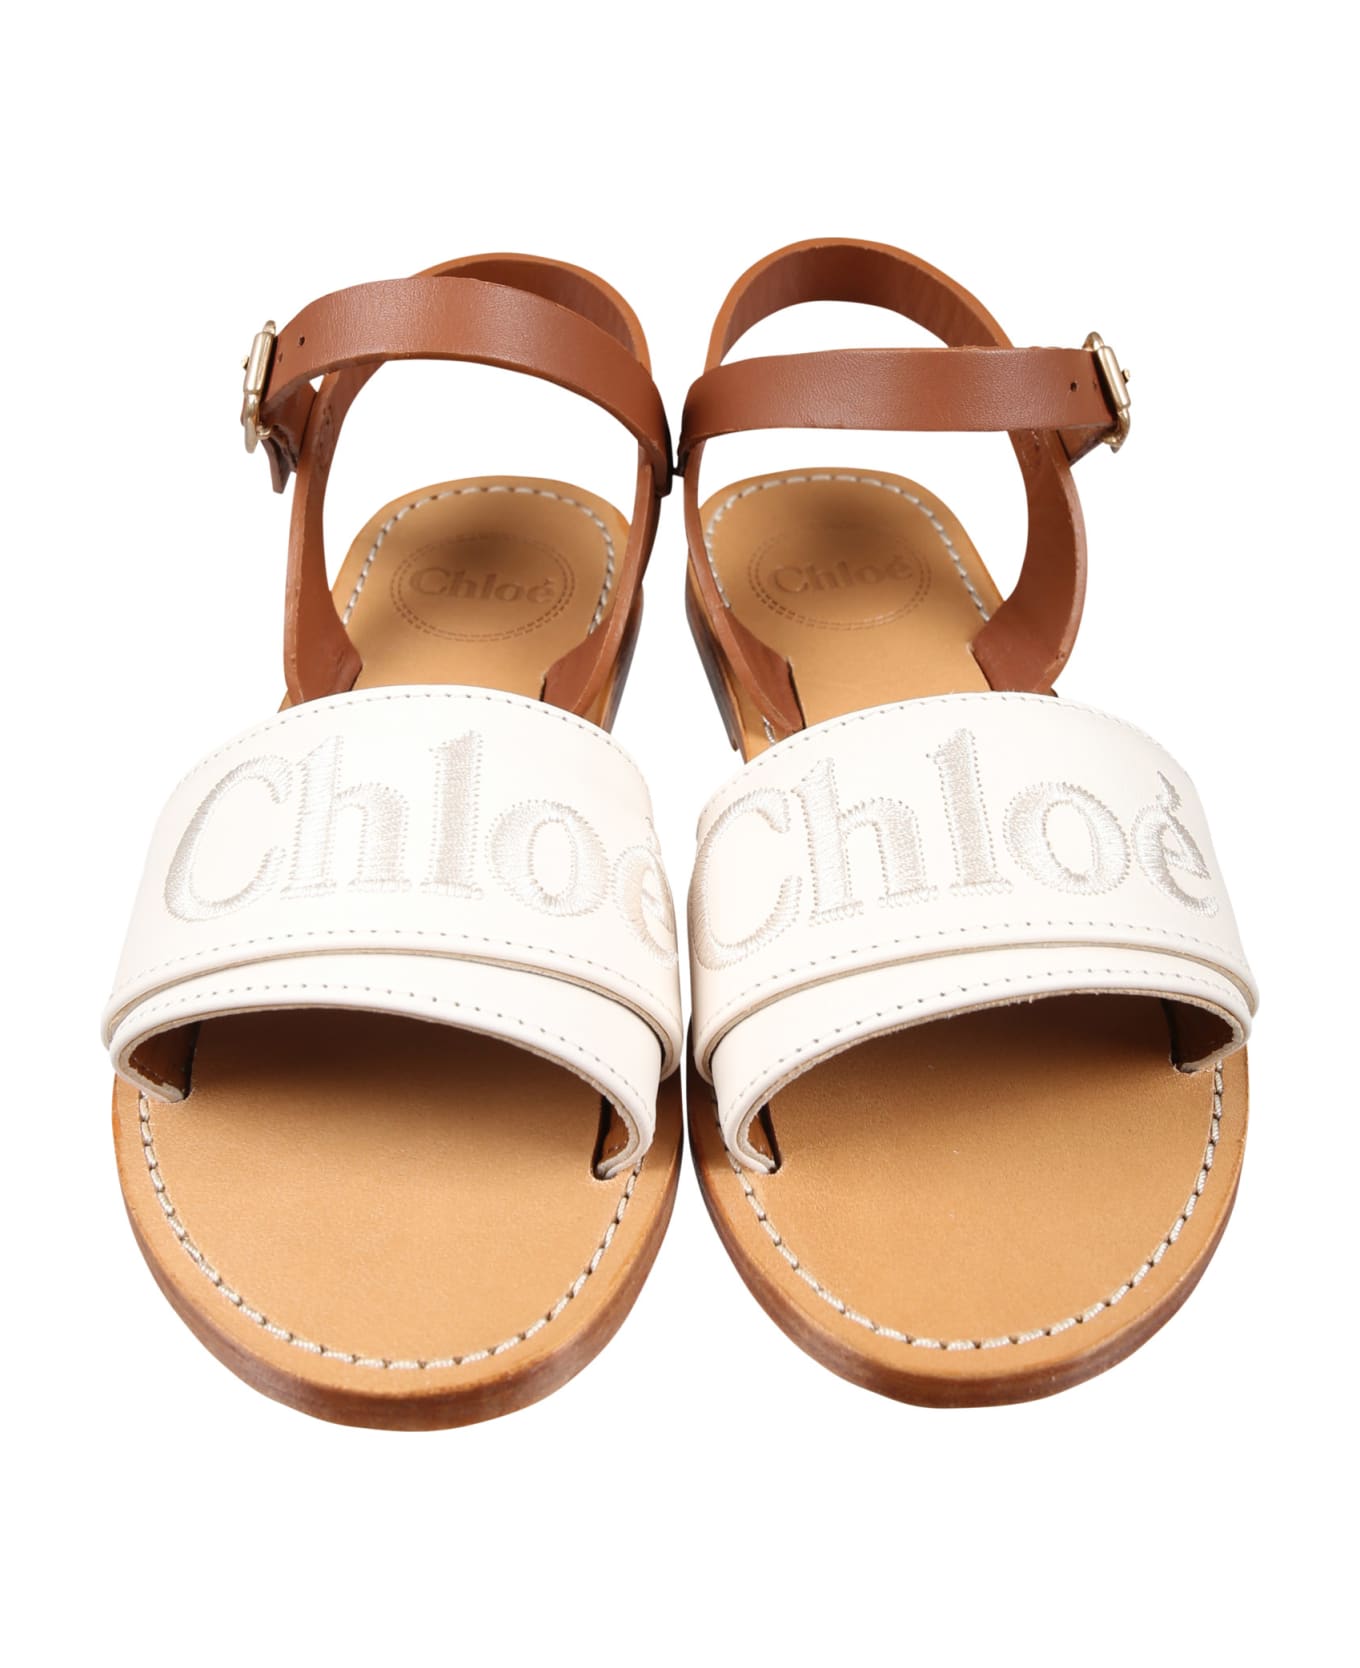 Chloé Ivory Sandals For Girl With Logo - Ivory シューズ